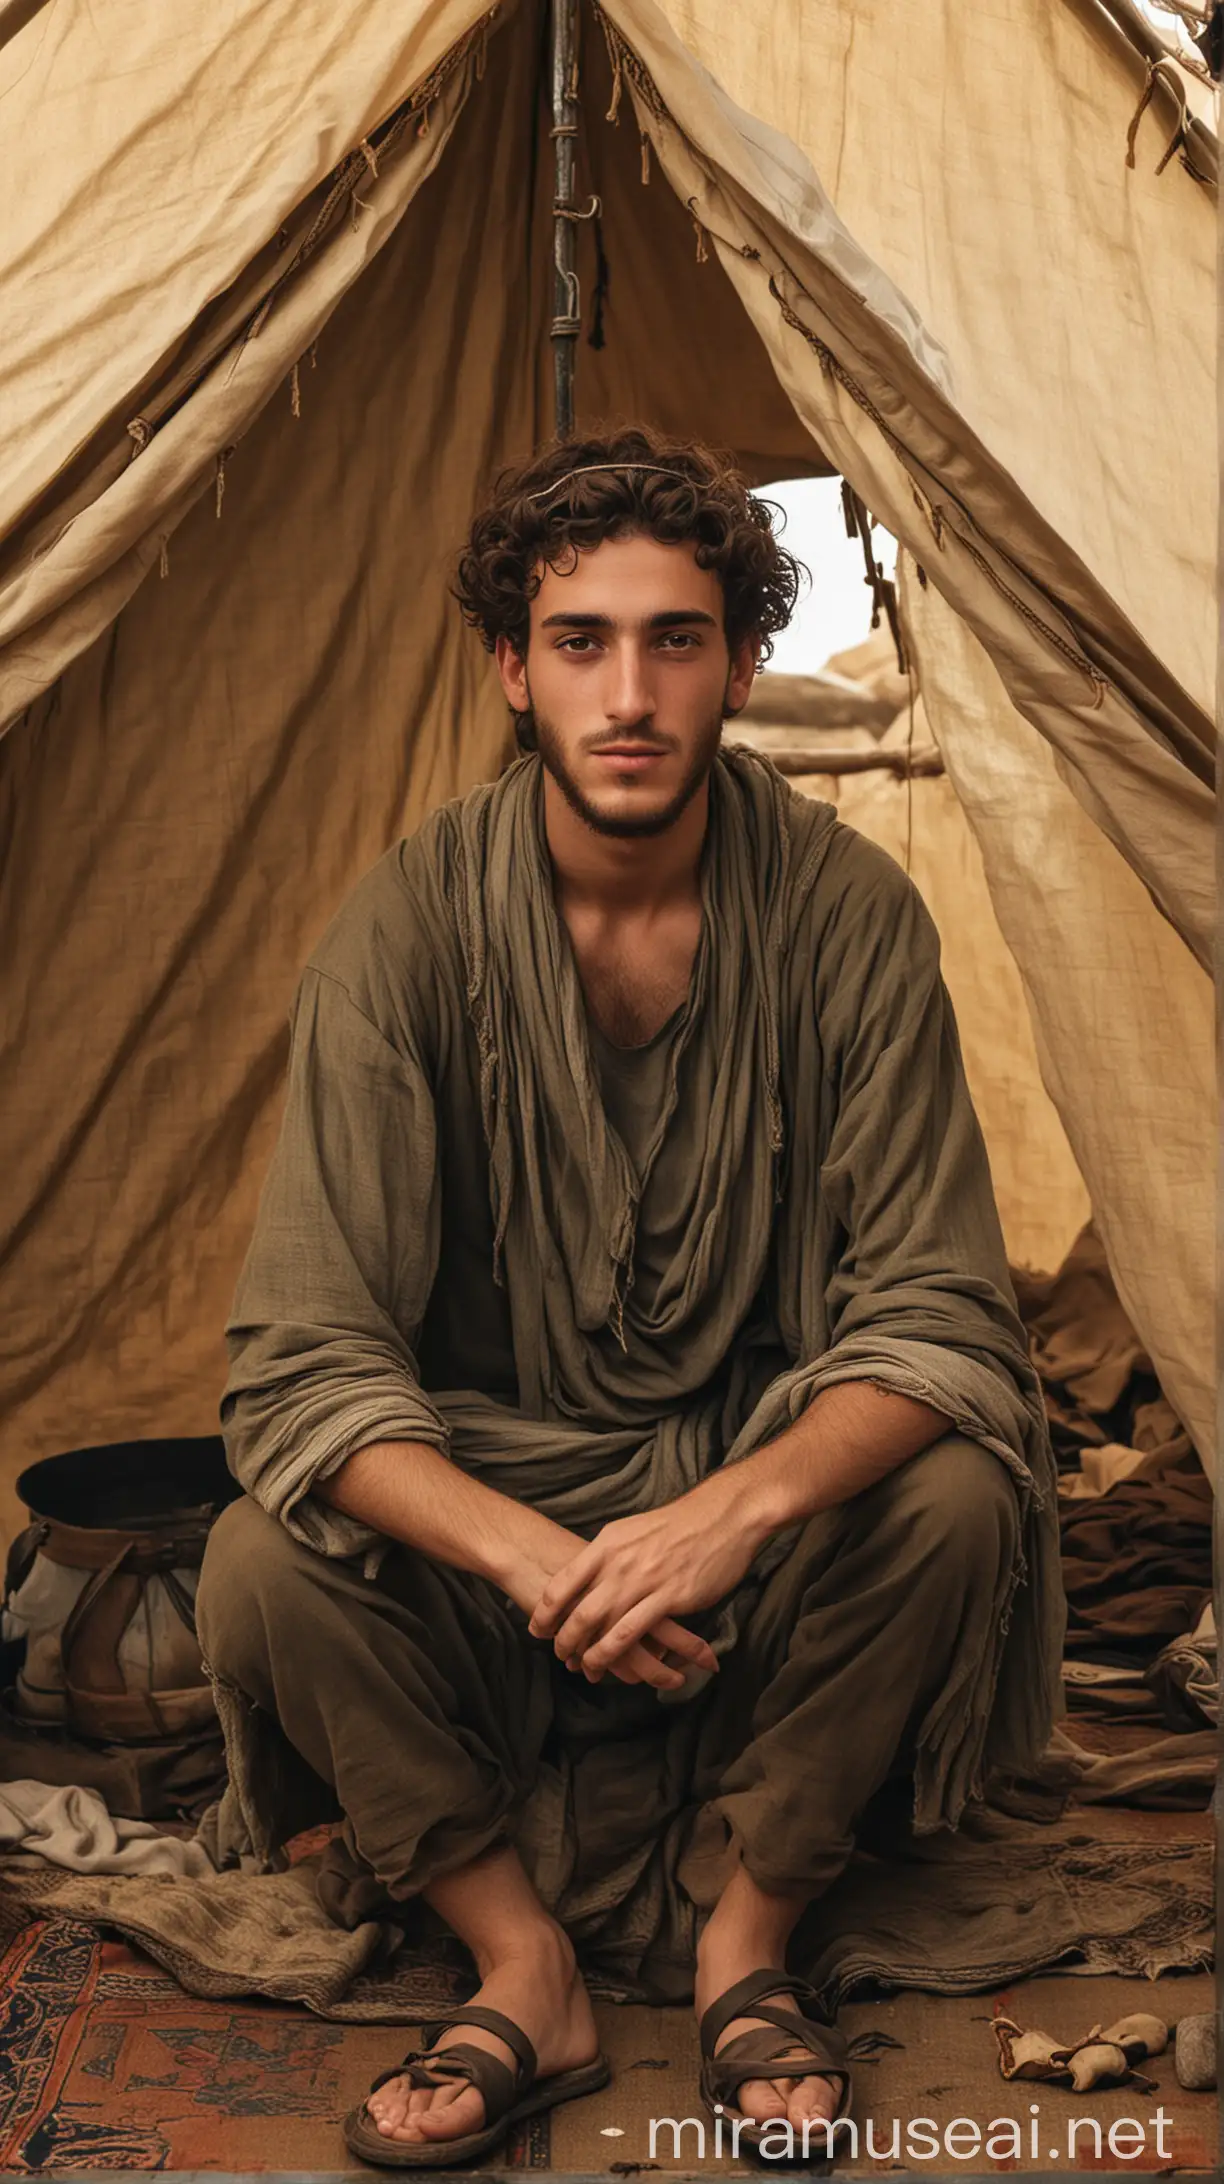 Young Jewish Man in Ancient Tent